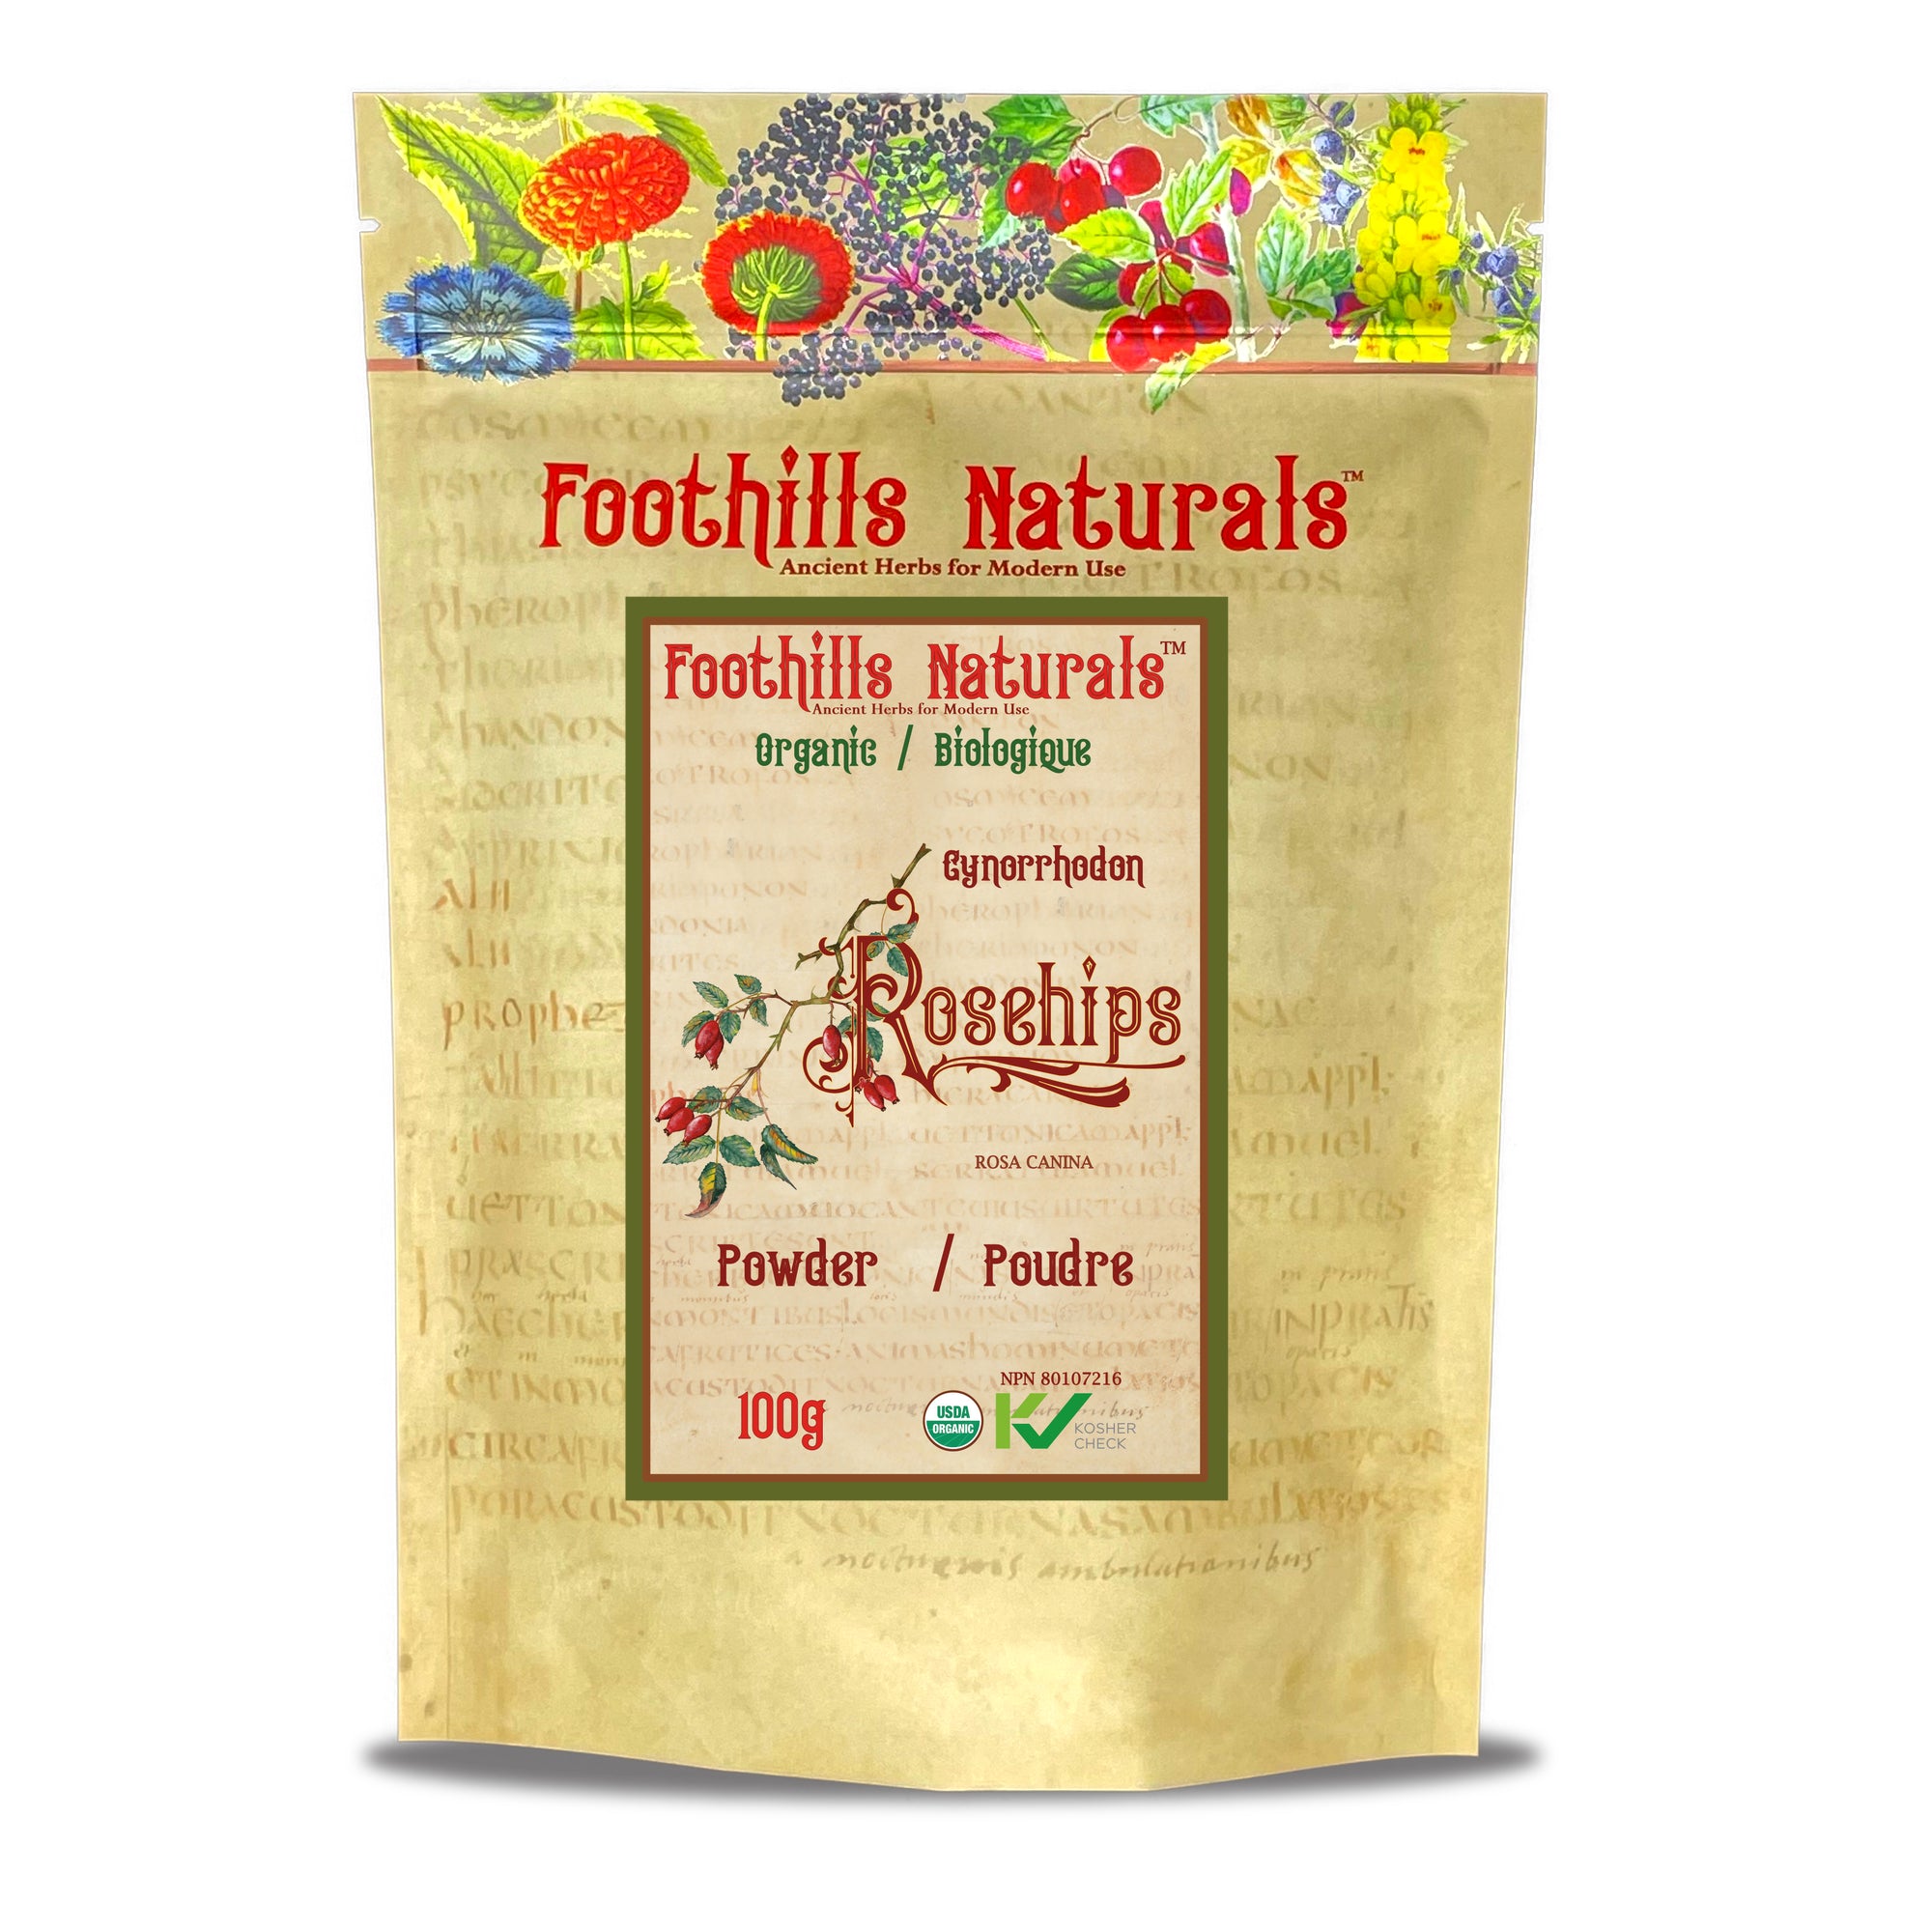 Rosehips Powder Organic - Antioxidants for Herbal Remedies and Gourmet Cooking